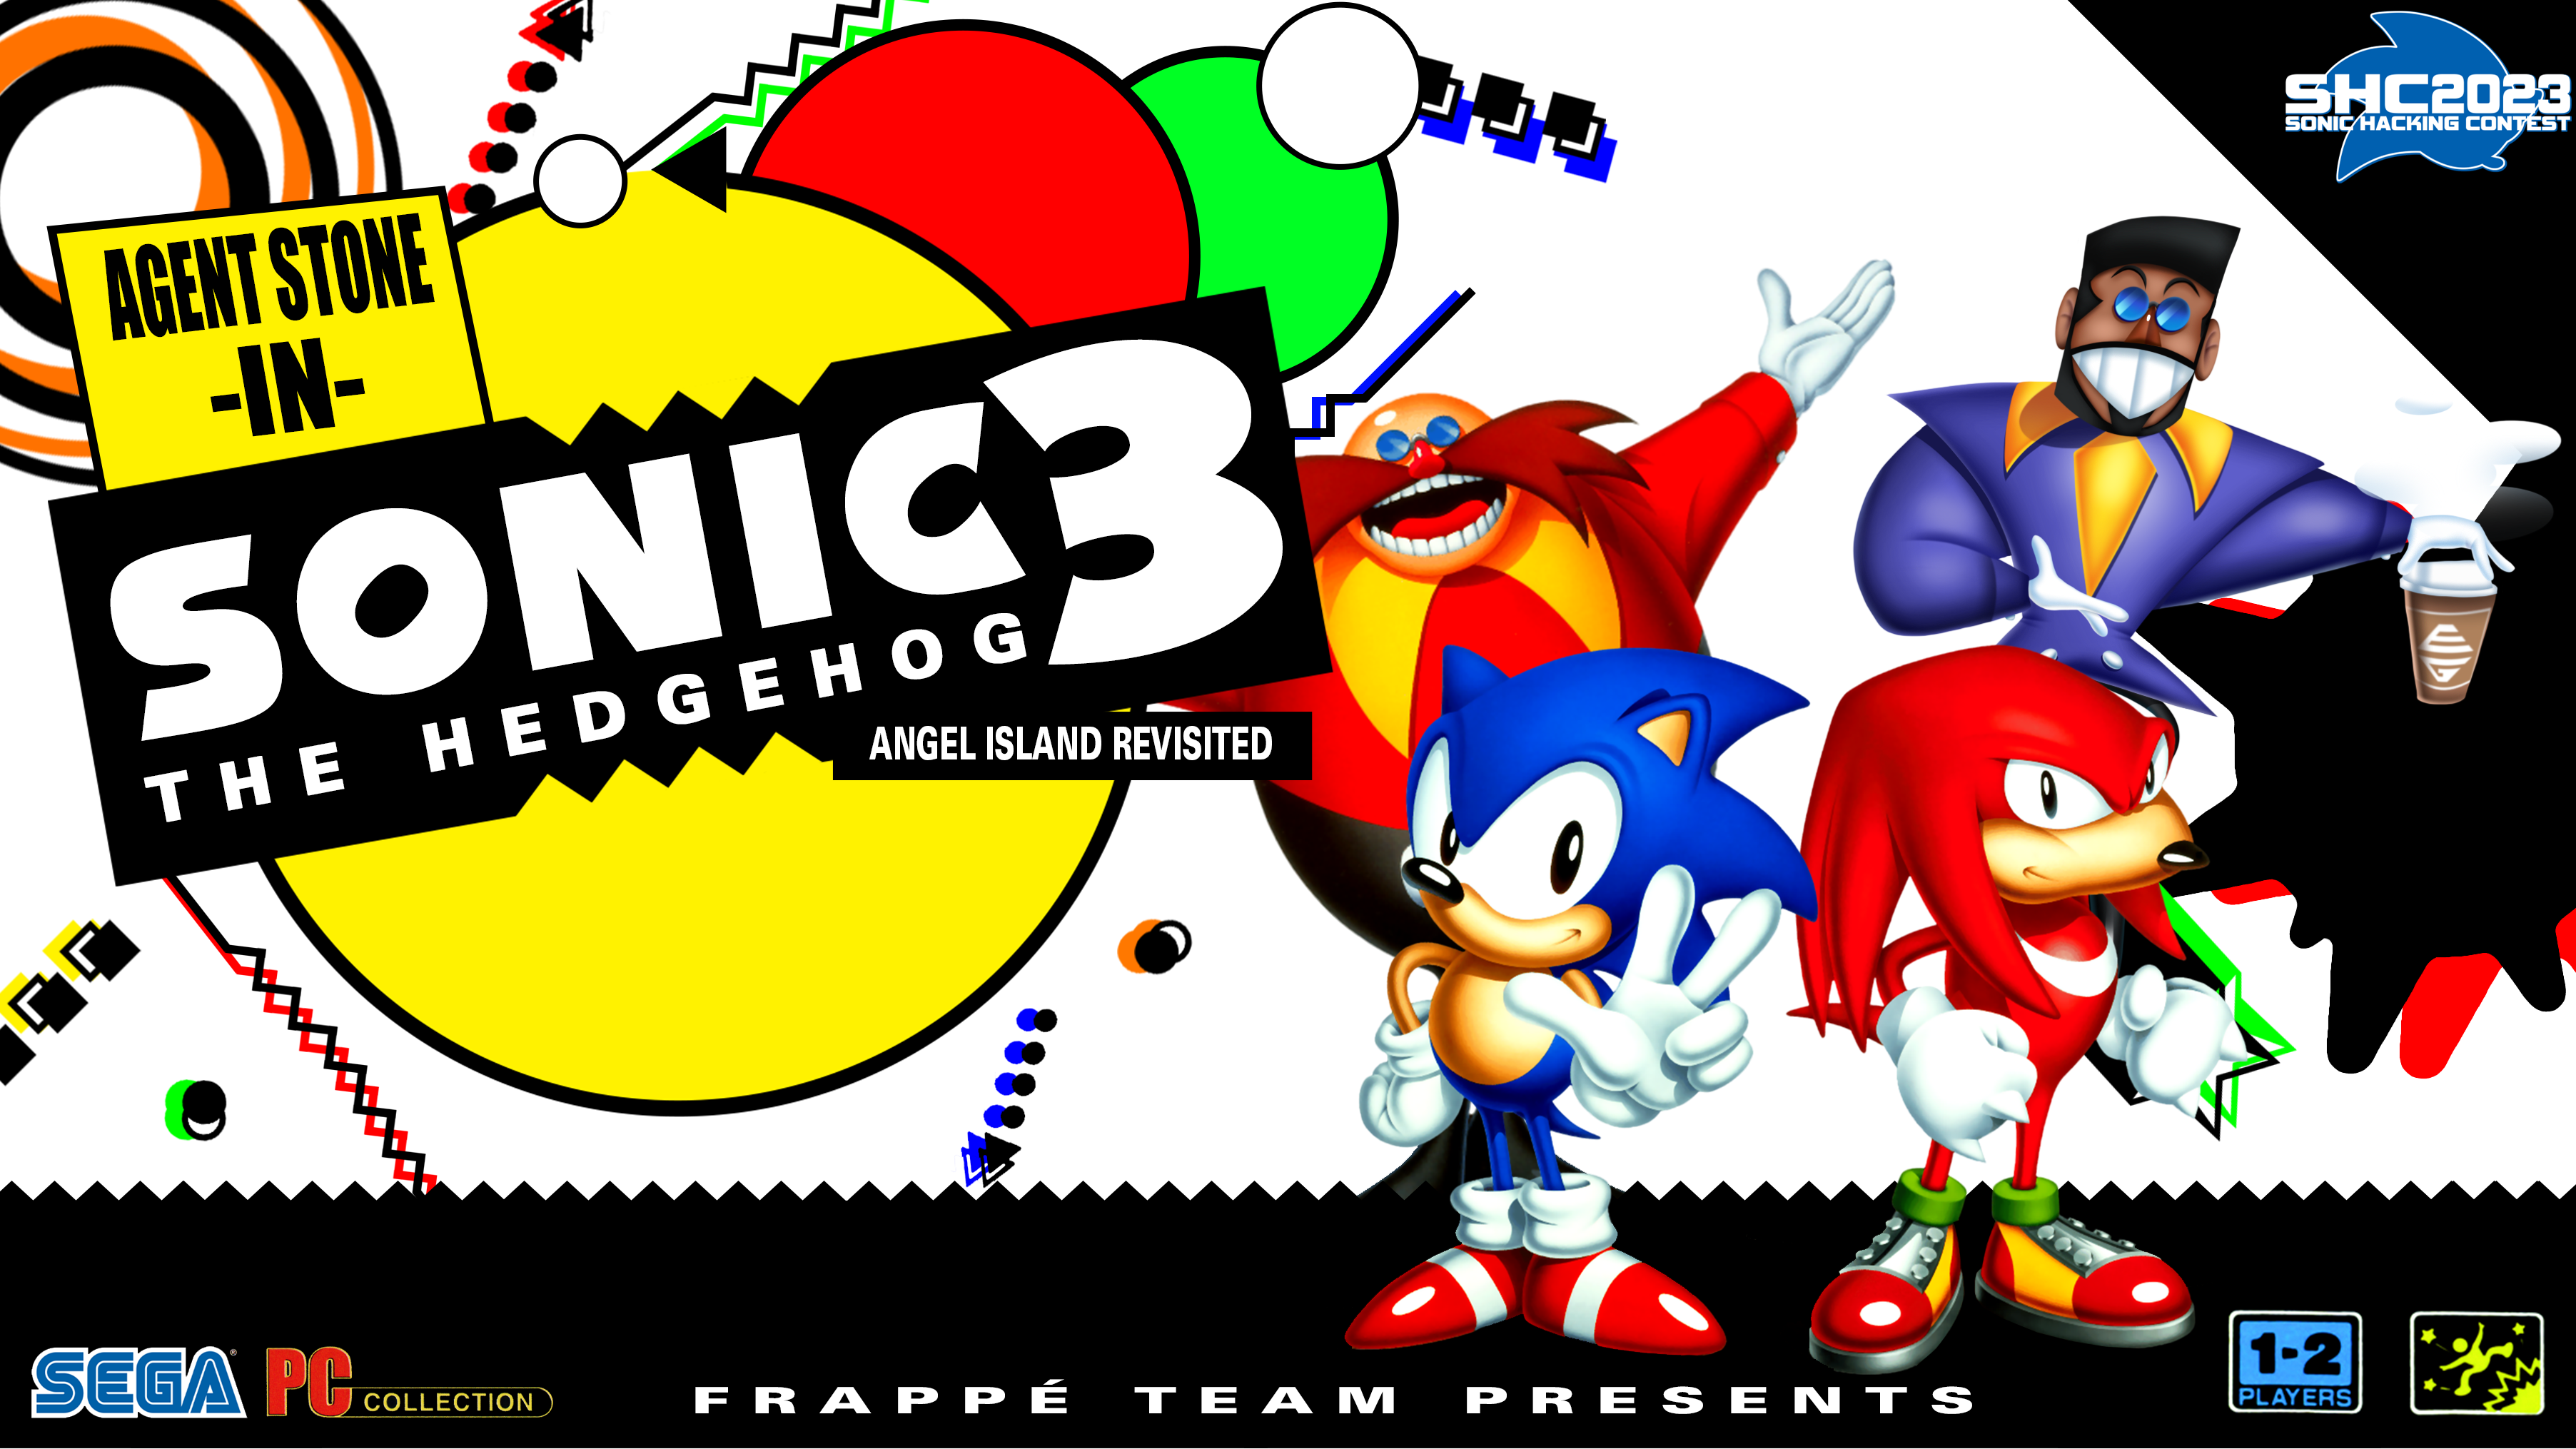 Sonic Hacking Contest :: The SHC2023 Contest :: Agent Stone in Sonic 3  A.I.R. (v0.8) :: By HazelSpooder